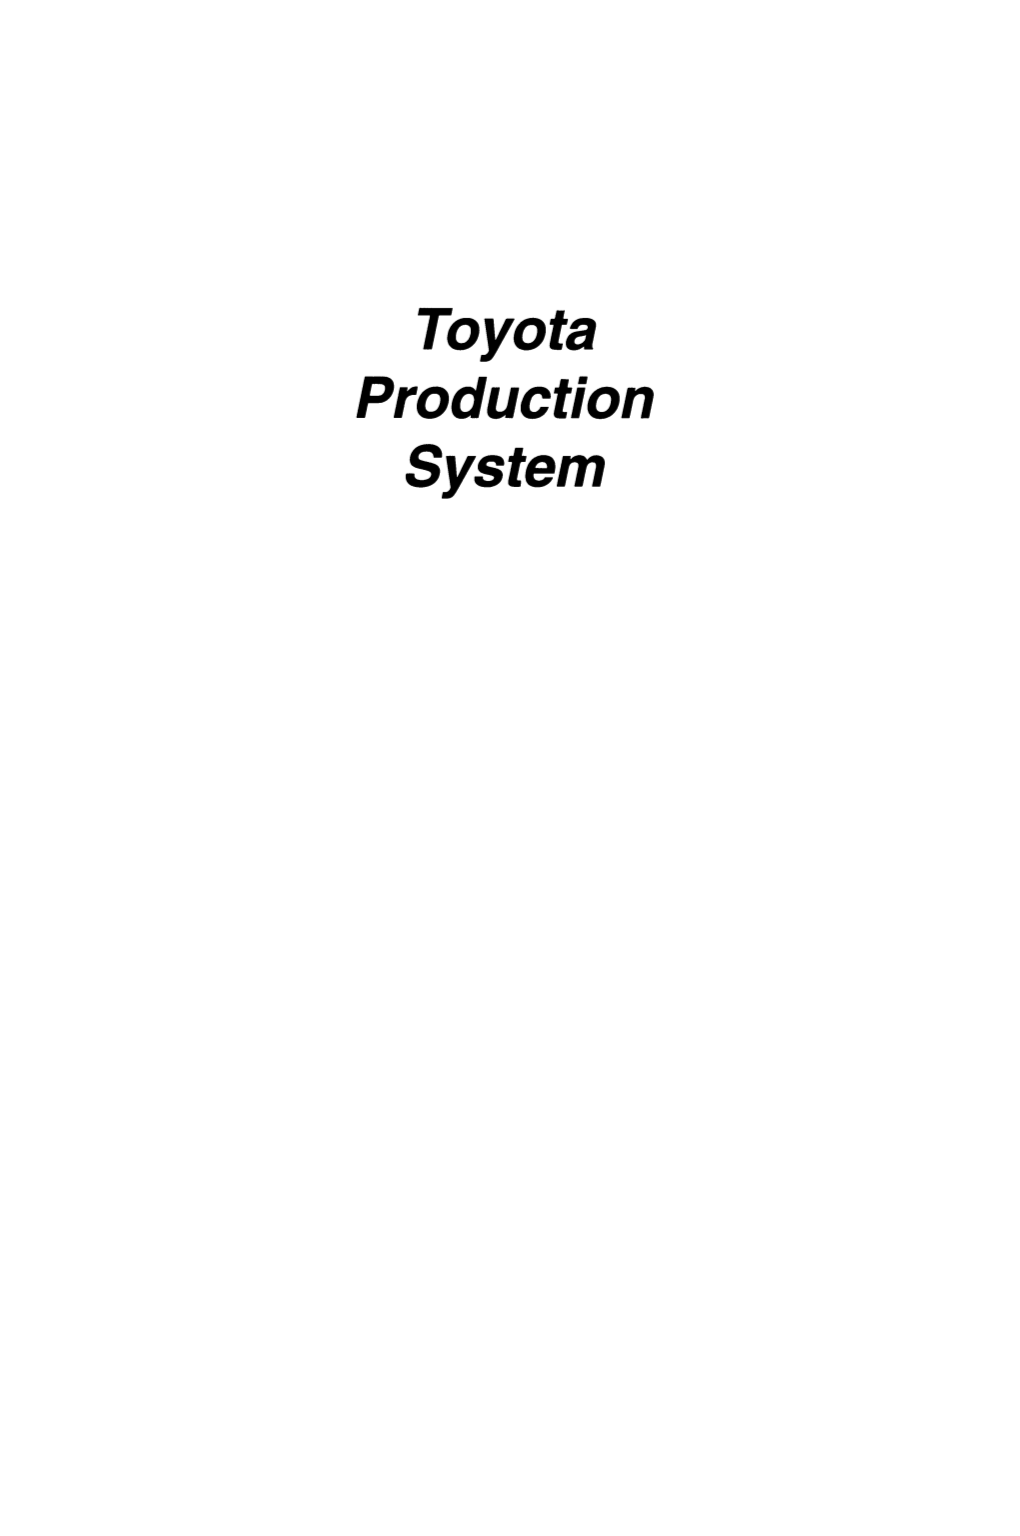 Toyota Production System Toyota Production System an Integrated Approach to Just-In-Time